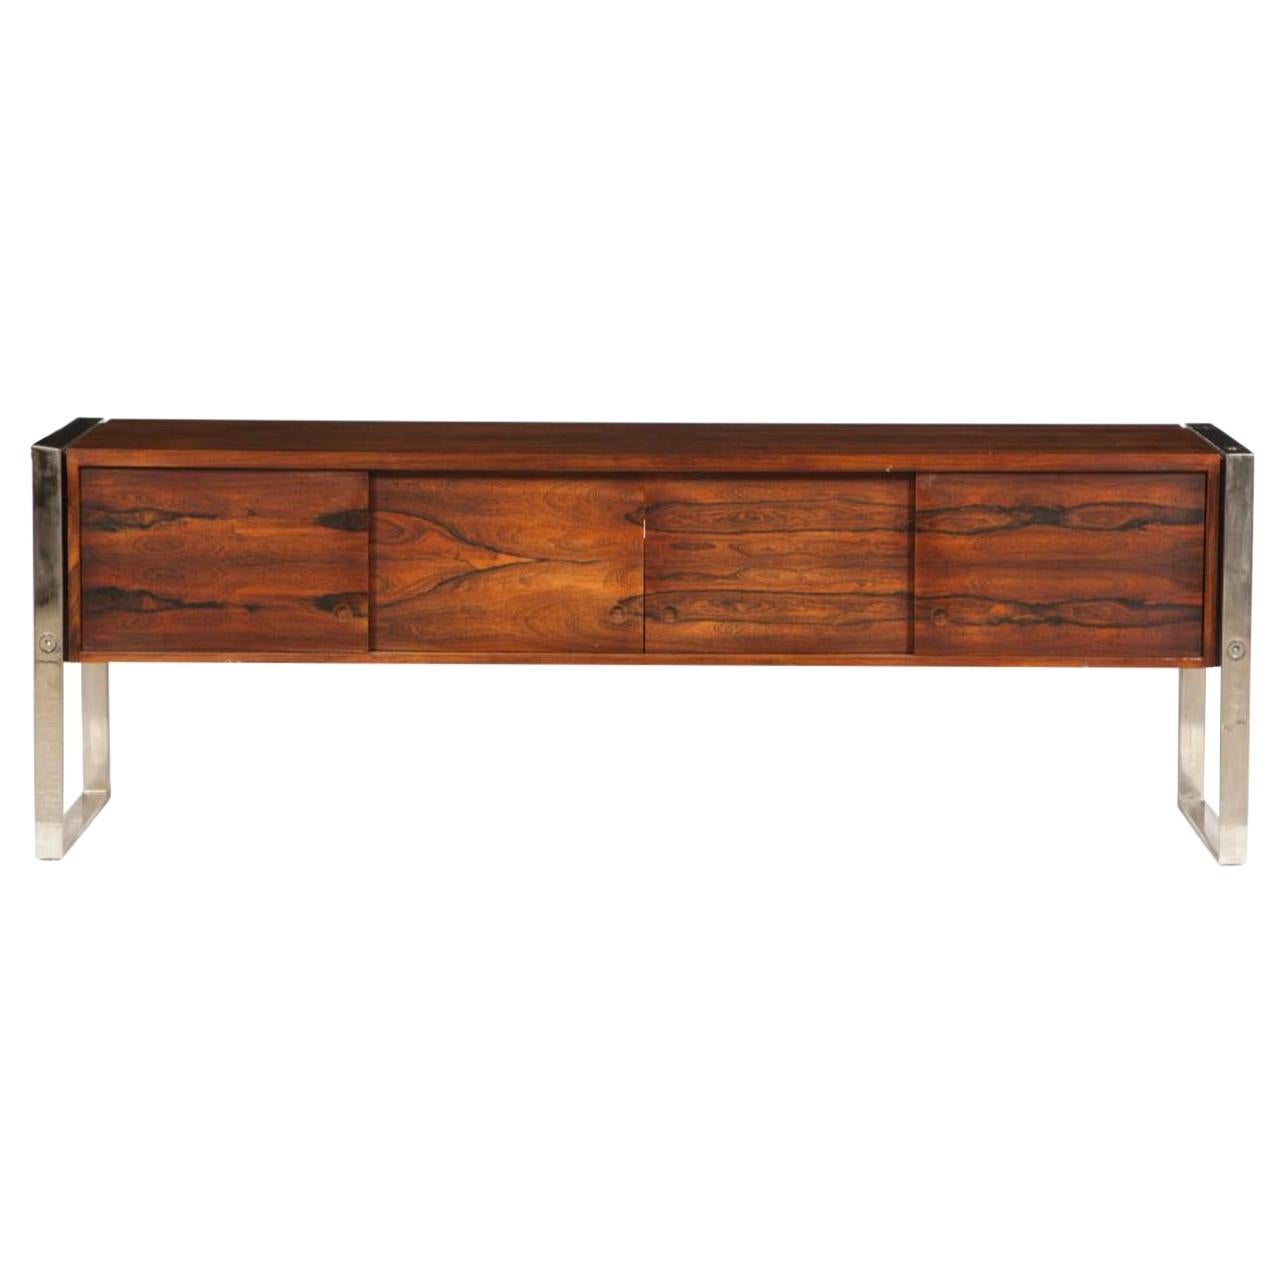 Leif Jacobsen Rosewood and Chromed Metal Console